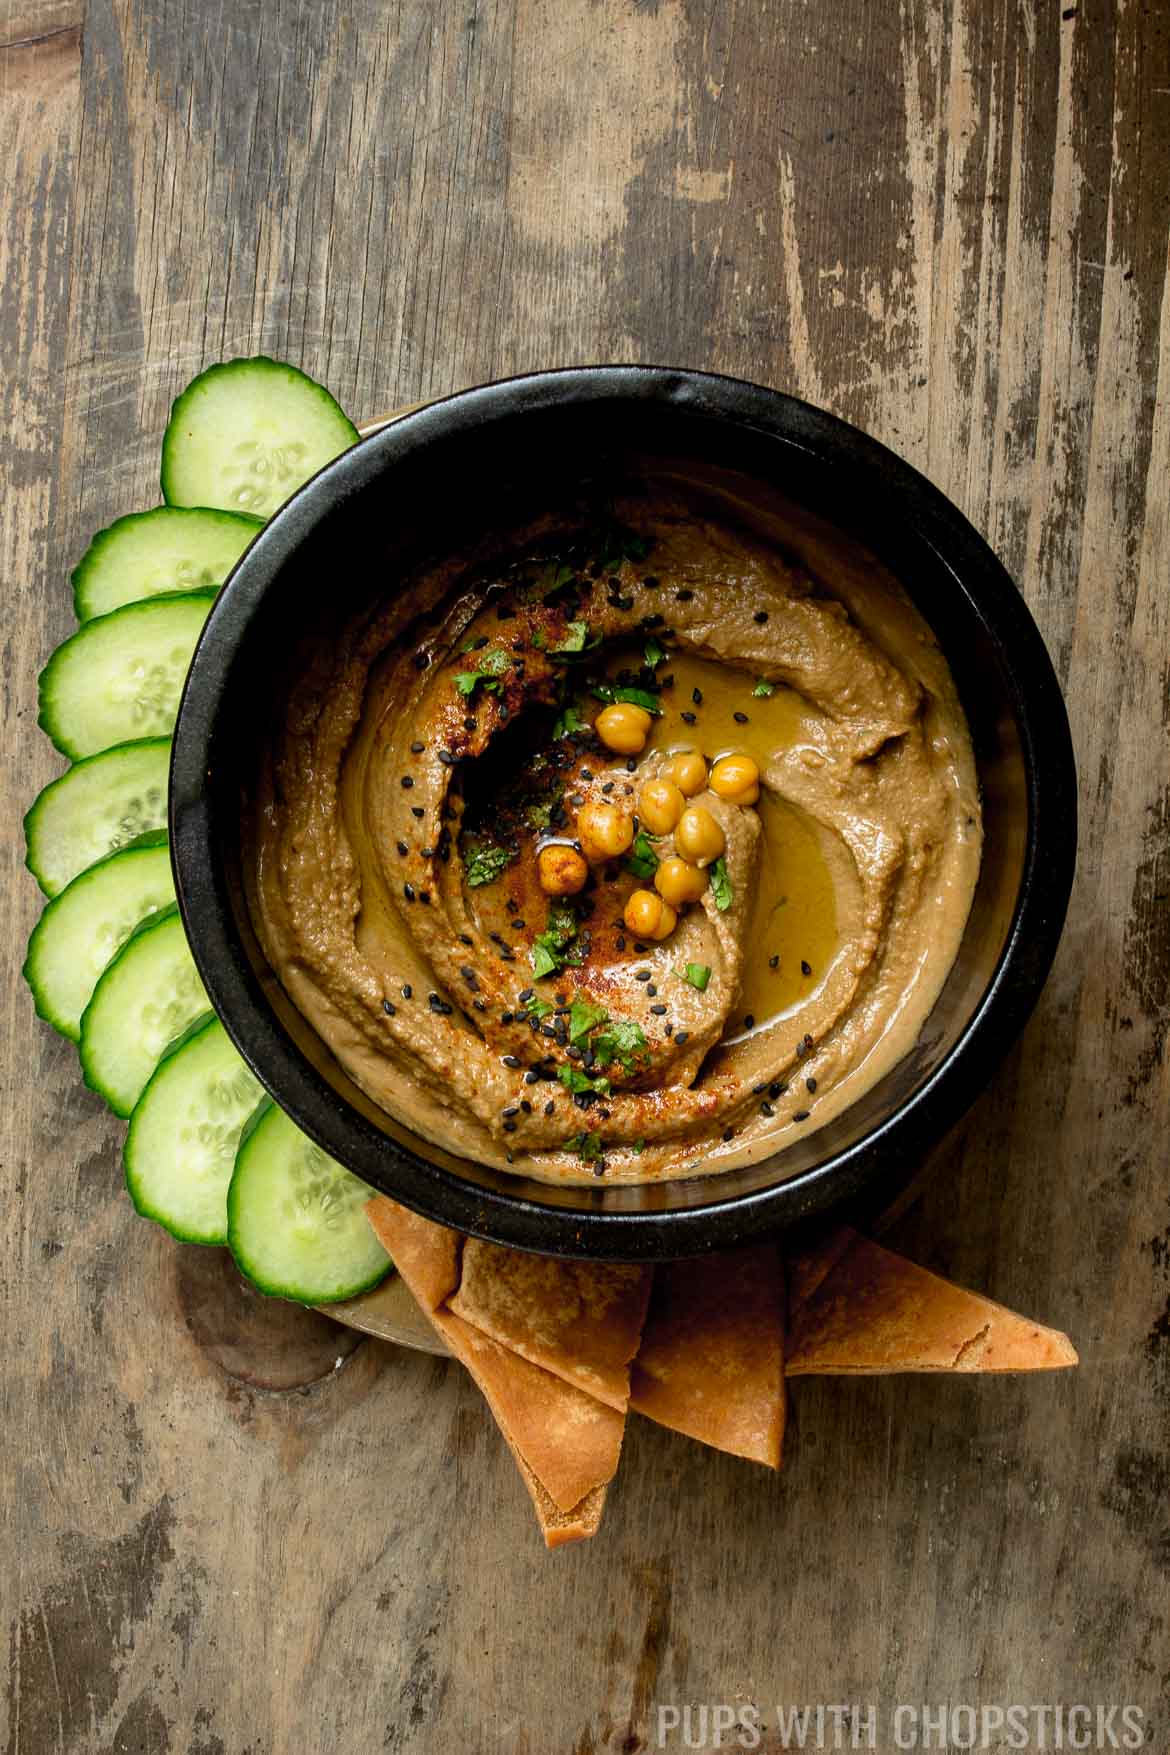 Black garlic hummus in a large black bowl served with cucumbers and pita chips on a wooden table